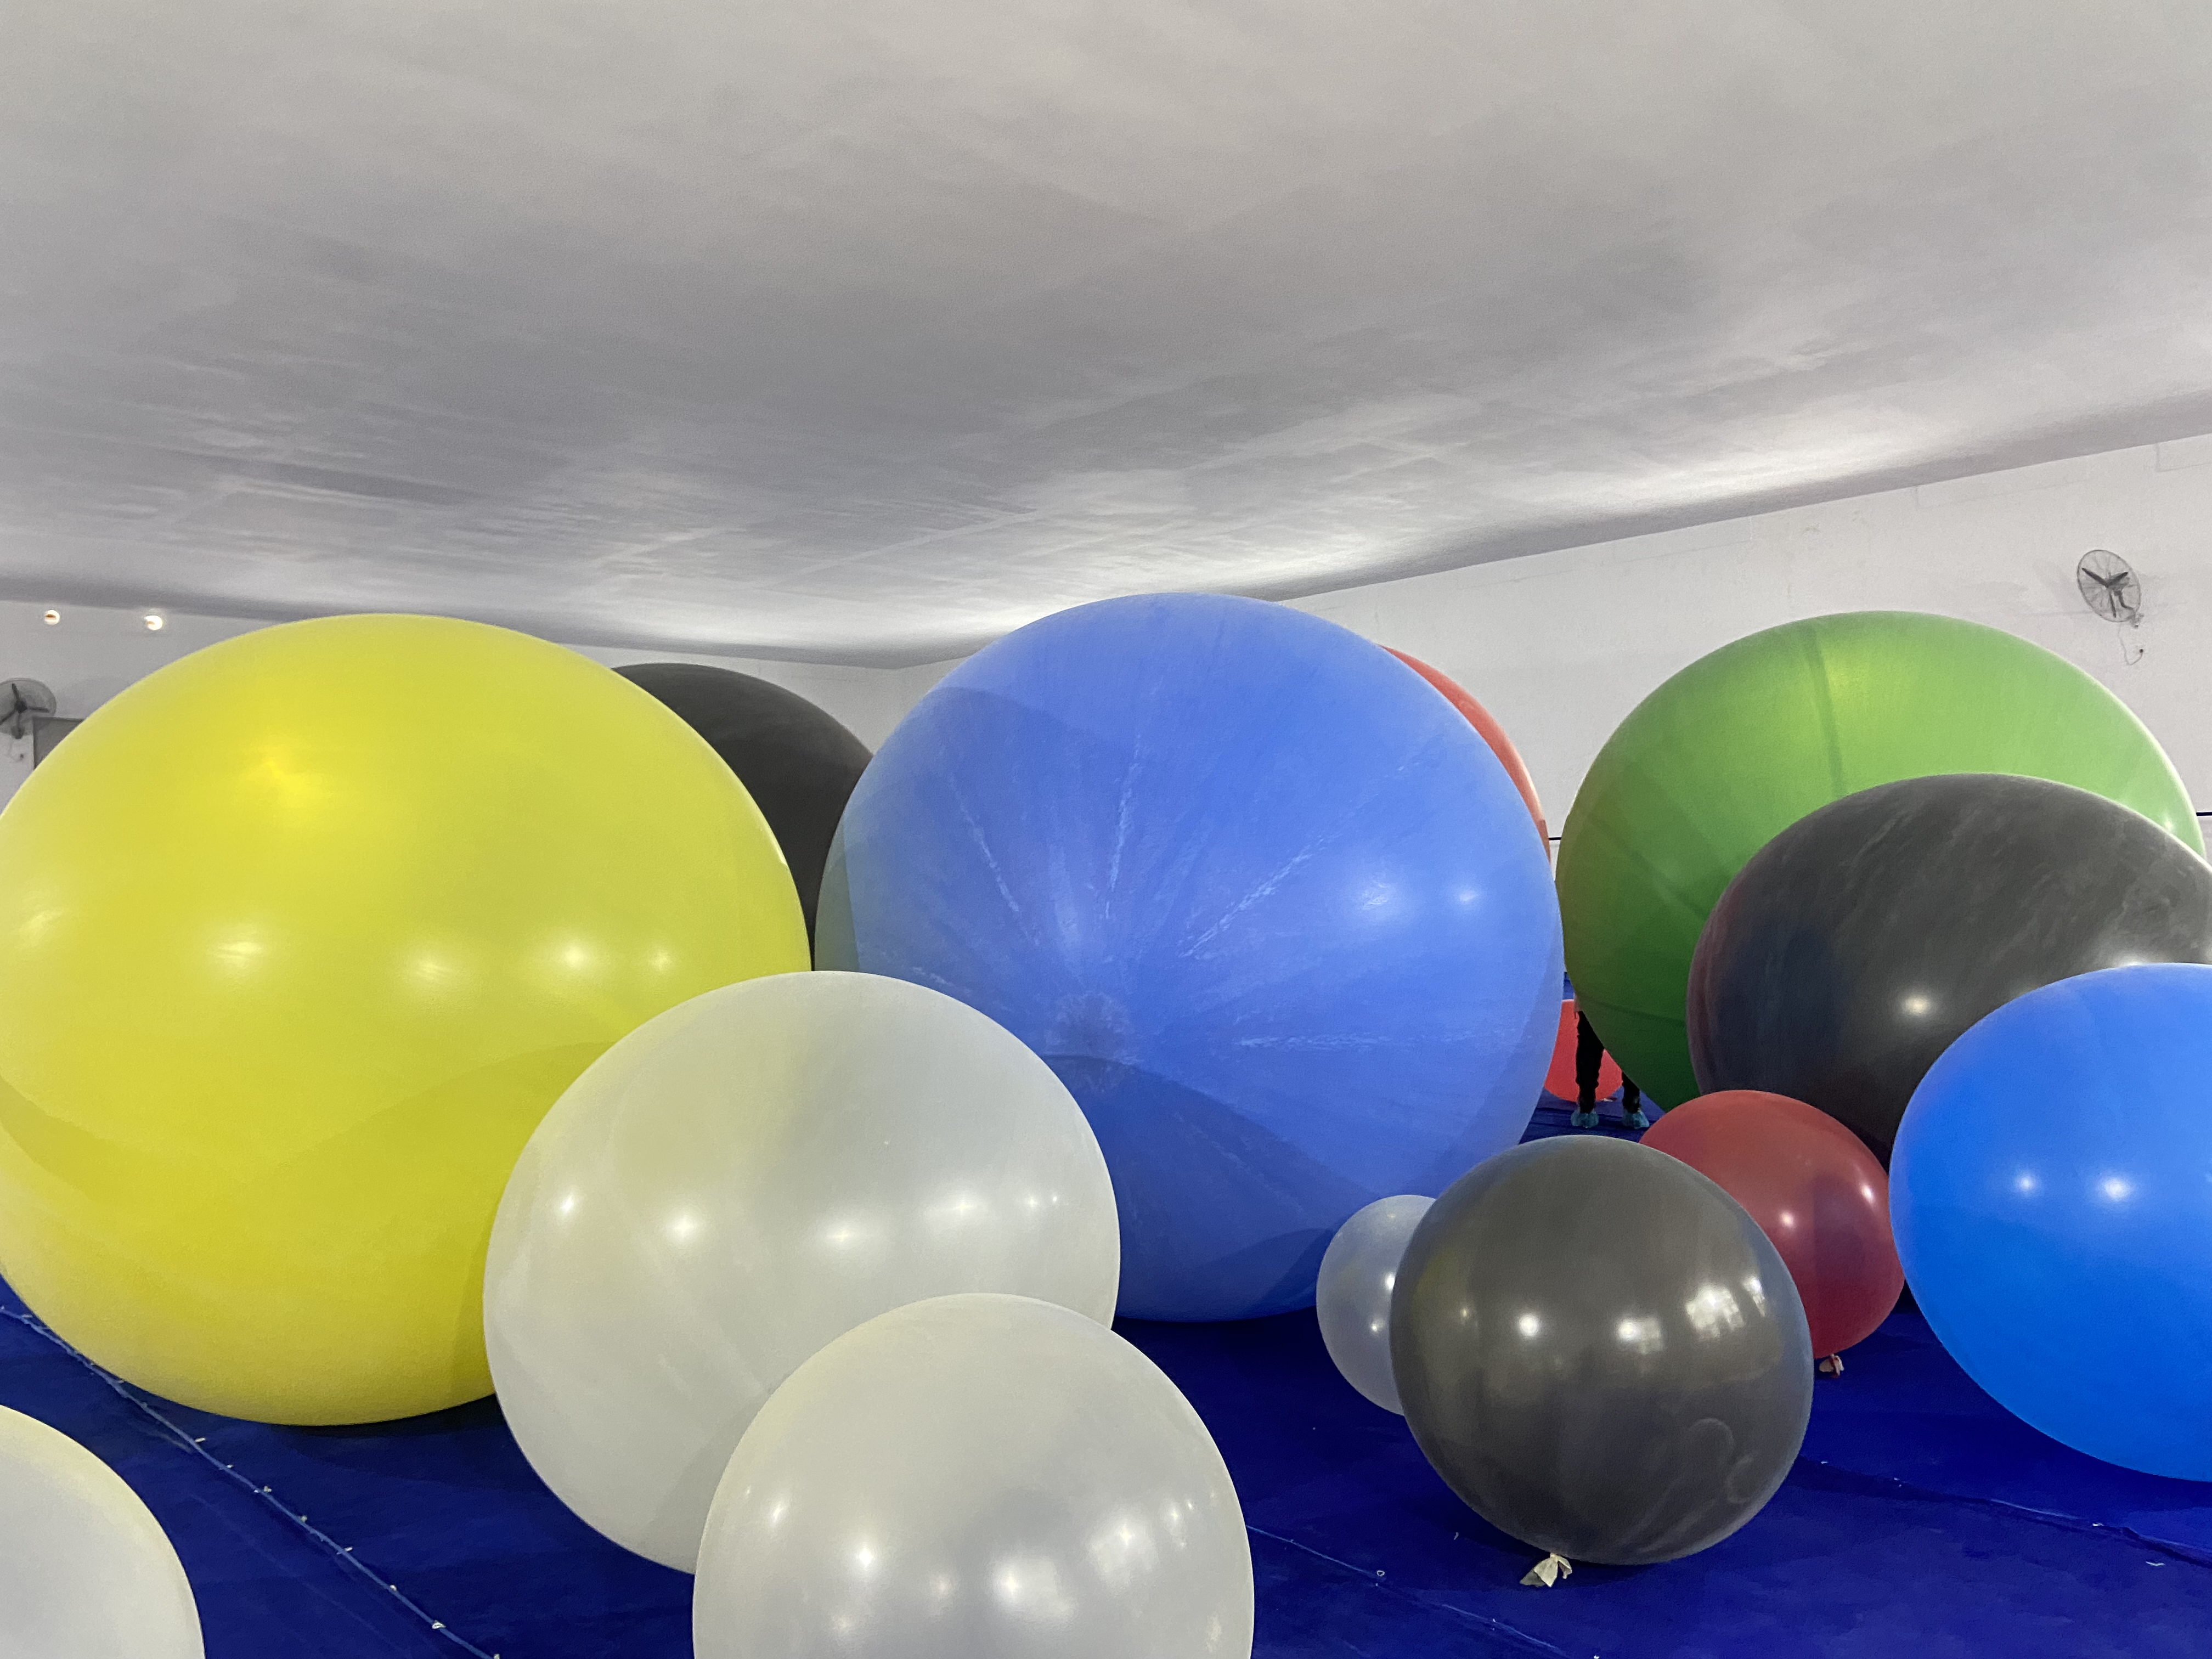 Giant Color Balloon, Balloons For Photo Shoot Wedding , Baby Shower, Birthday Party, Event Decoration